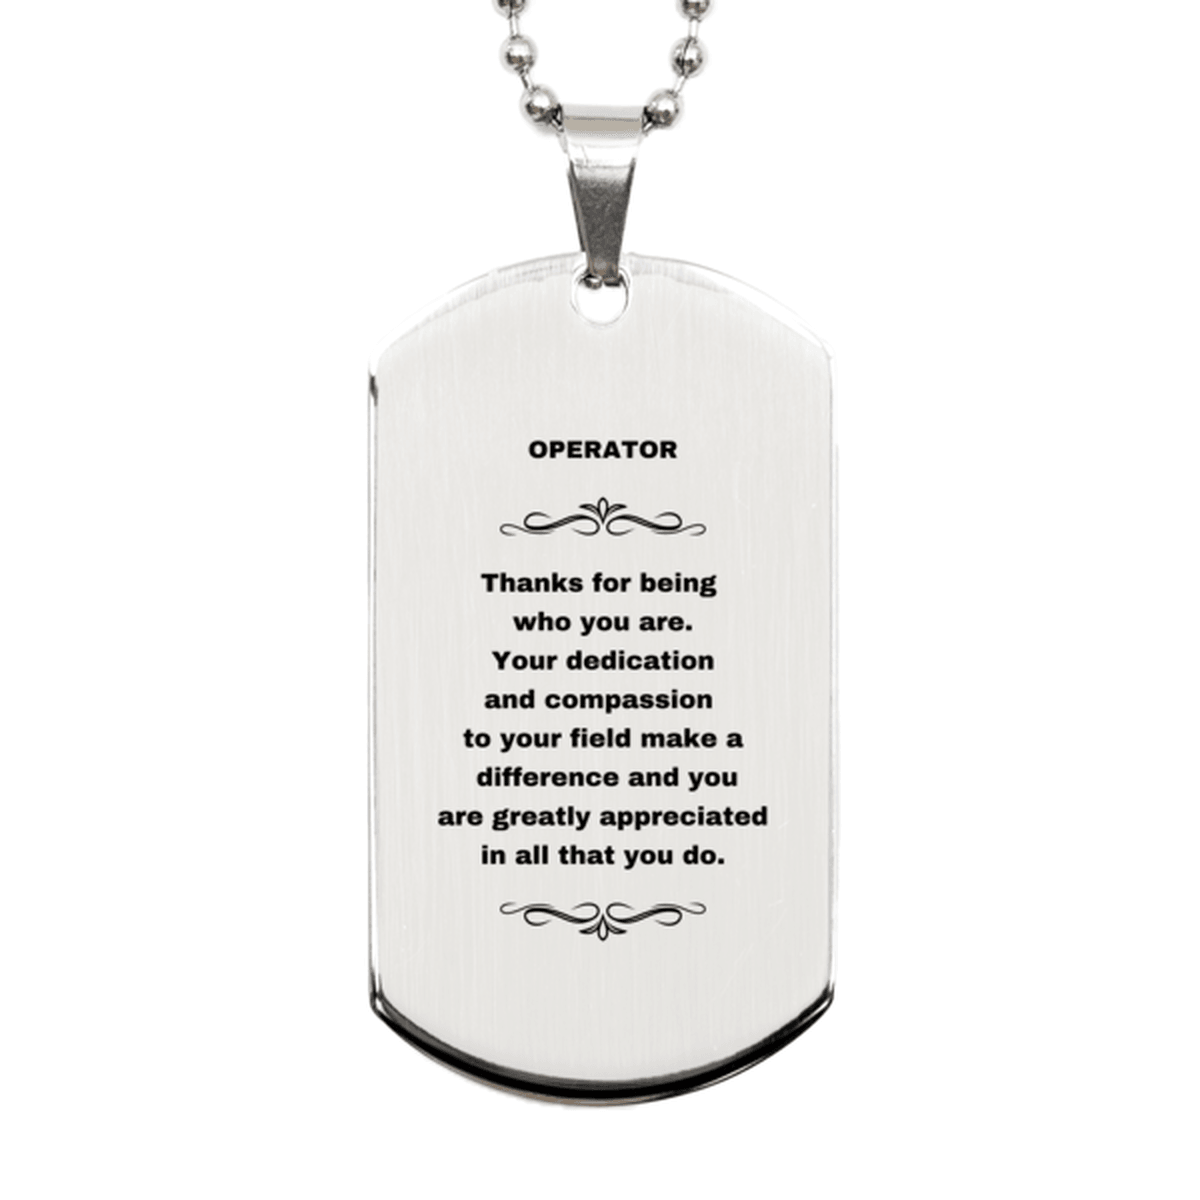 Operator Silver Dog Tag Engraved Necklace - Thanks for being who you are - Birthday Christmas Jewelry Gifts Coworkers Colleague Boss - Mallard Moon Gift Shop